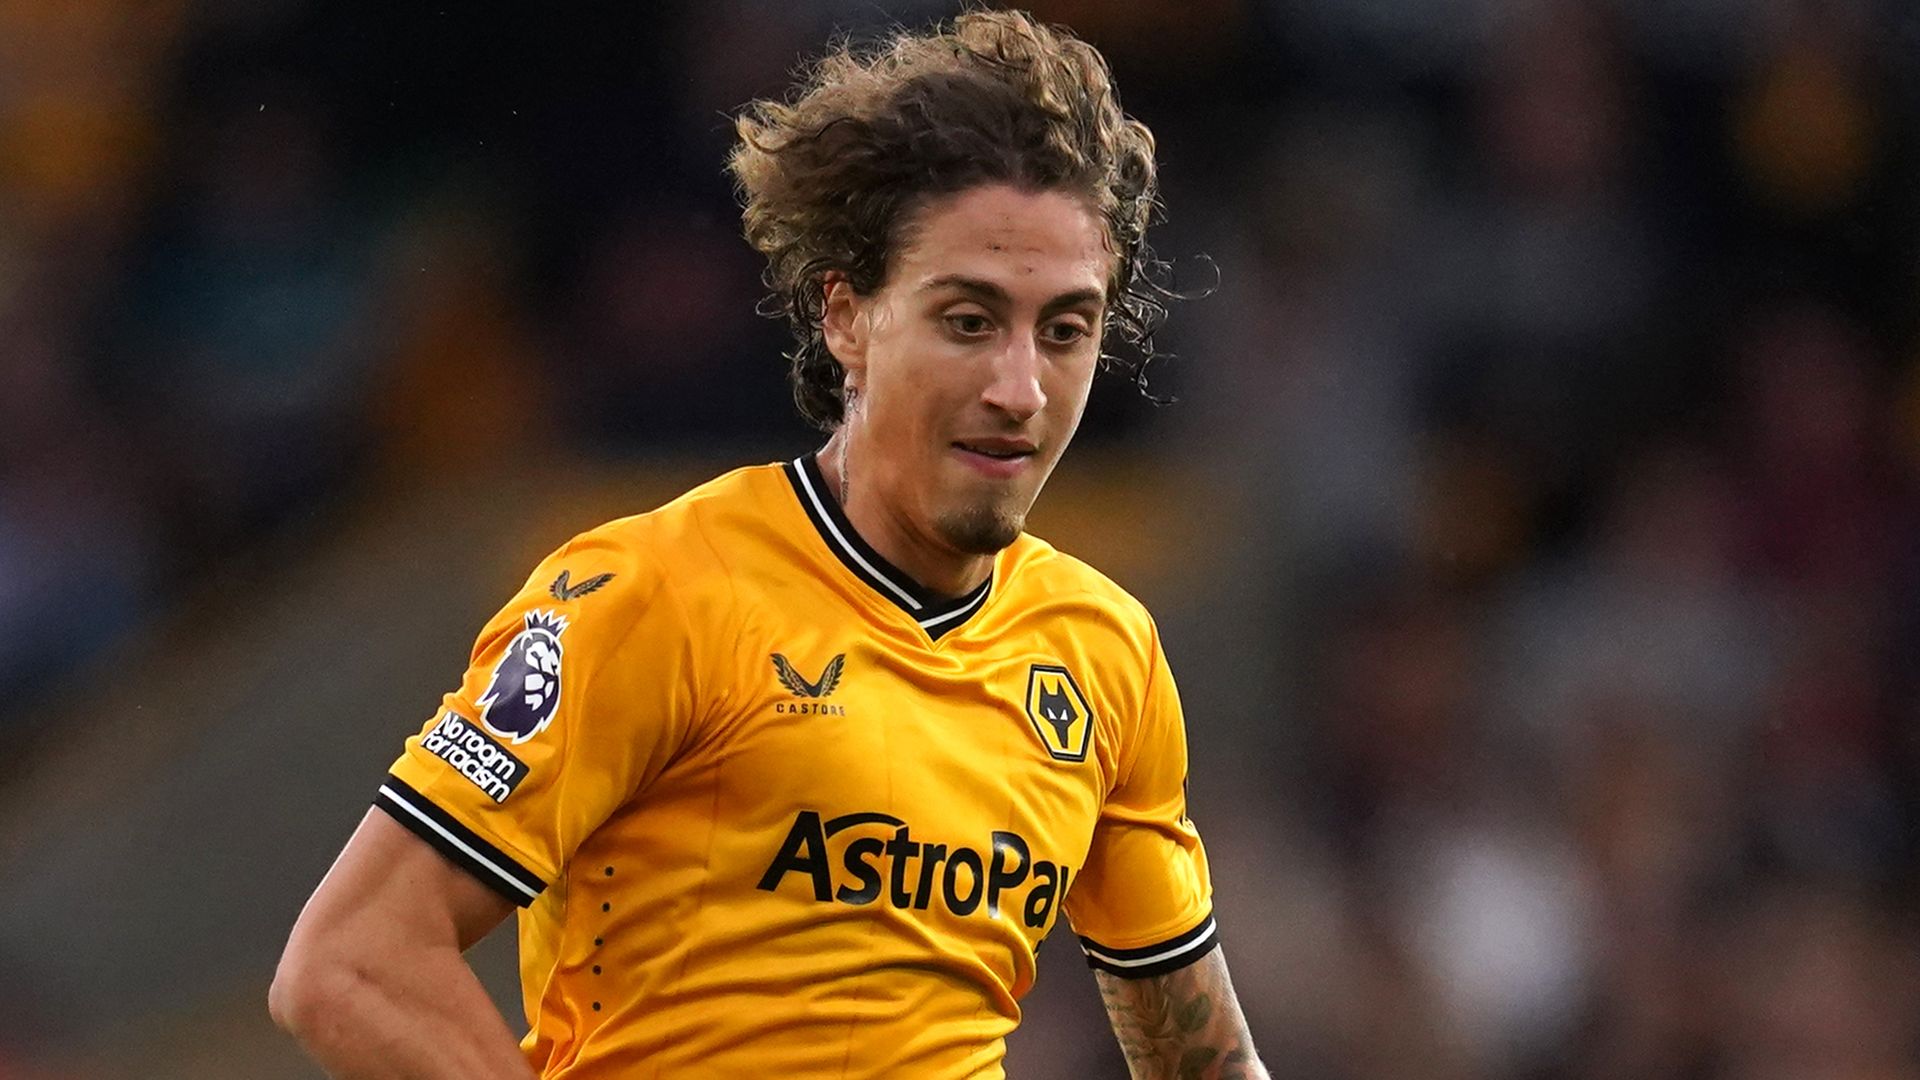 Silva set to join Rangers on loan from Wolves